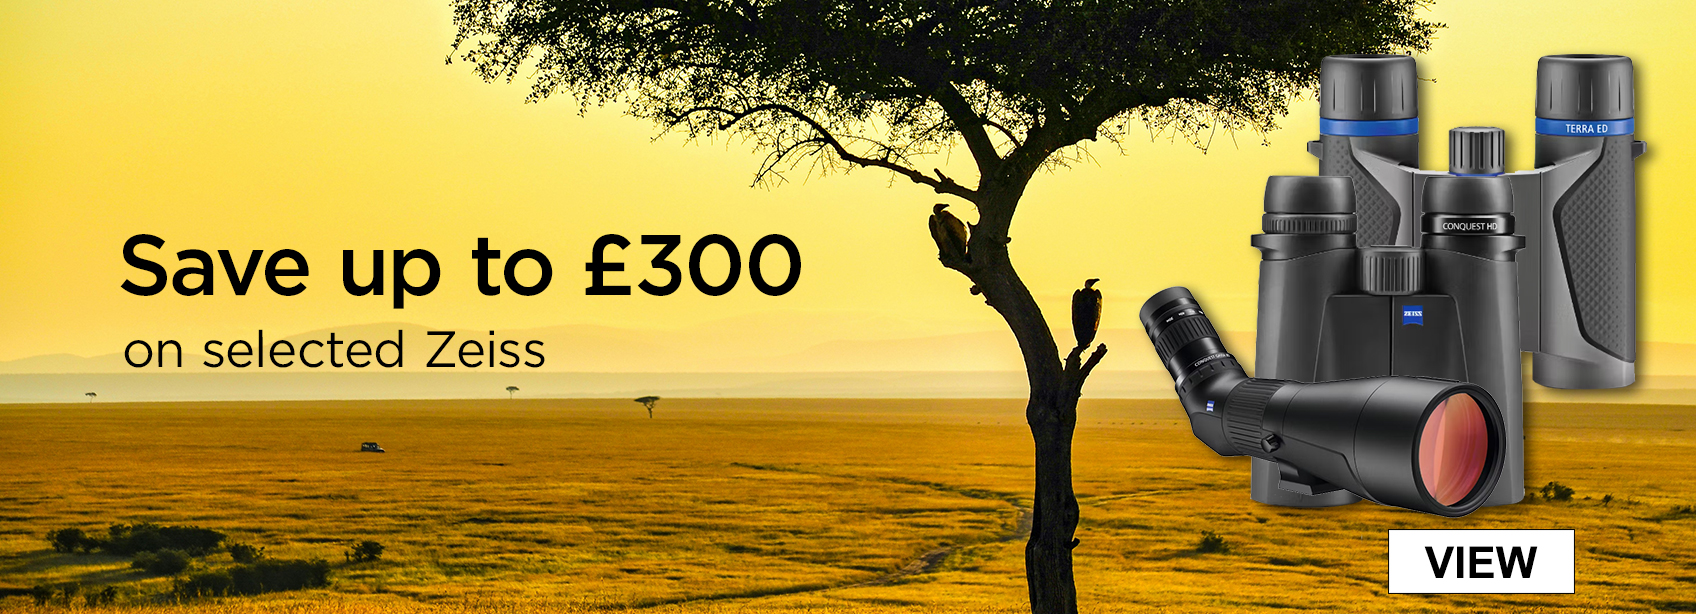 Save up to £300 on selected Zeiss Optics